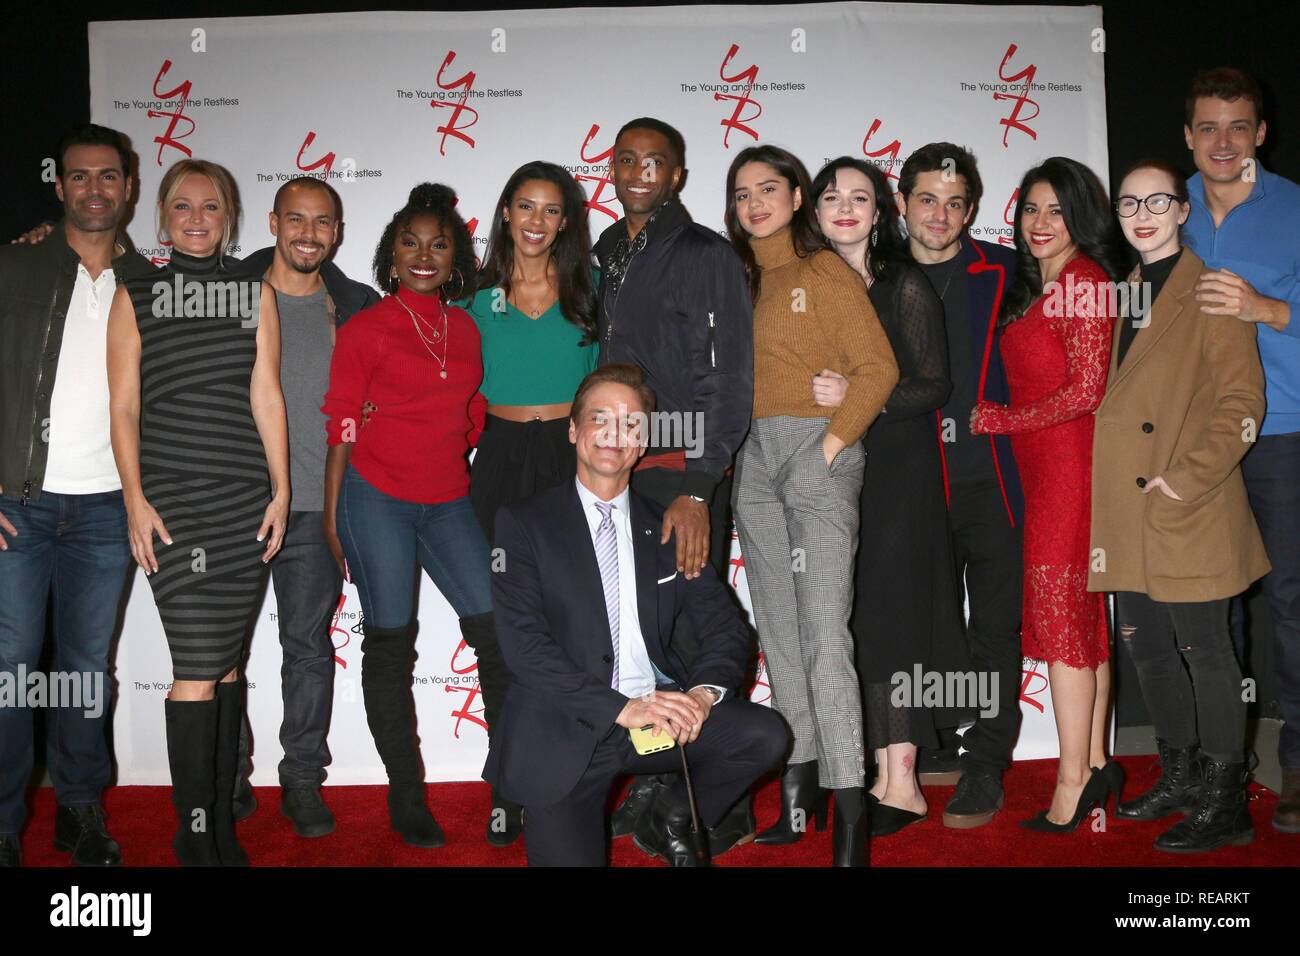 Jordi Vilasuso, Sharon Case, Bryton James, Loren Lott, Alice Hunter, Christian LeBlanc, Brooks Darnell, Sasha Calle, Cait Fairbanks, Zack Tinker, Noemi´ Gonzalez, Camryn Grimes, Michael Mealor at arrivals for THE YOUNG AND THE RESTLESS Celebrates 30 Years as TV’s #1 Daytime Drama, CBS Television City, Los Angeles, CA January 17, 2019. Photo By: Priscilla Grant/Everett Collection Stock Photo